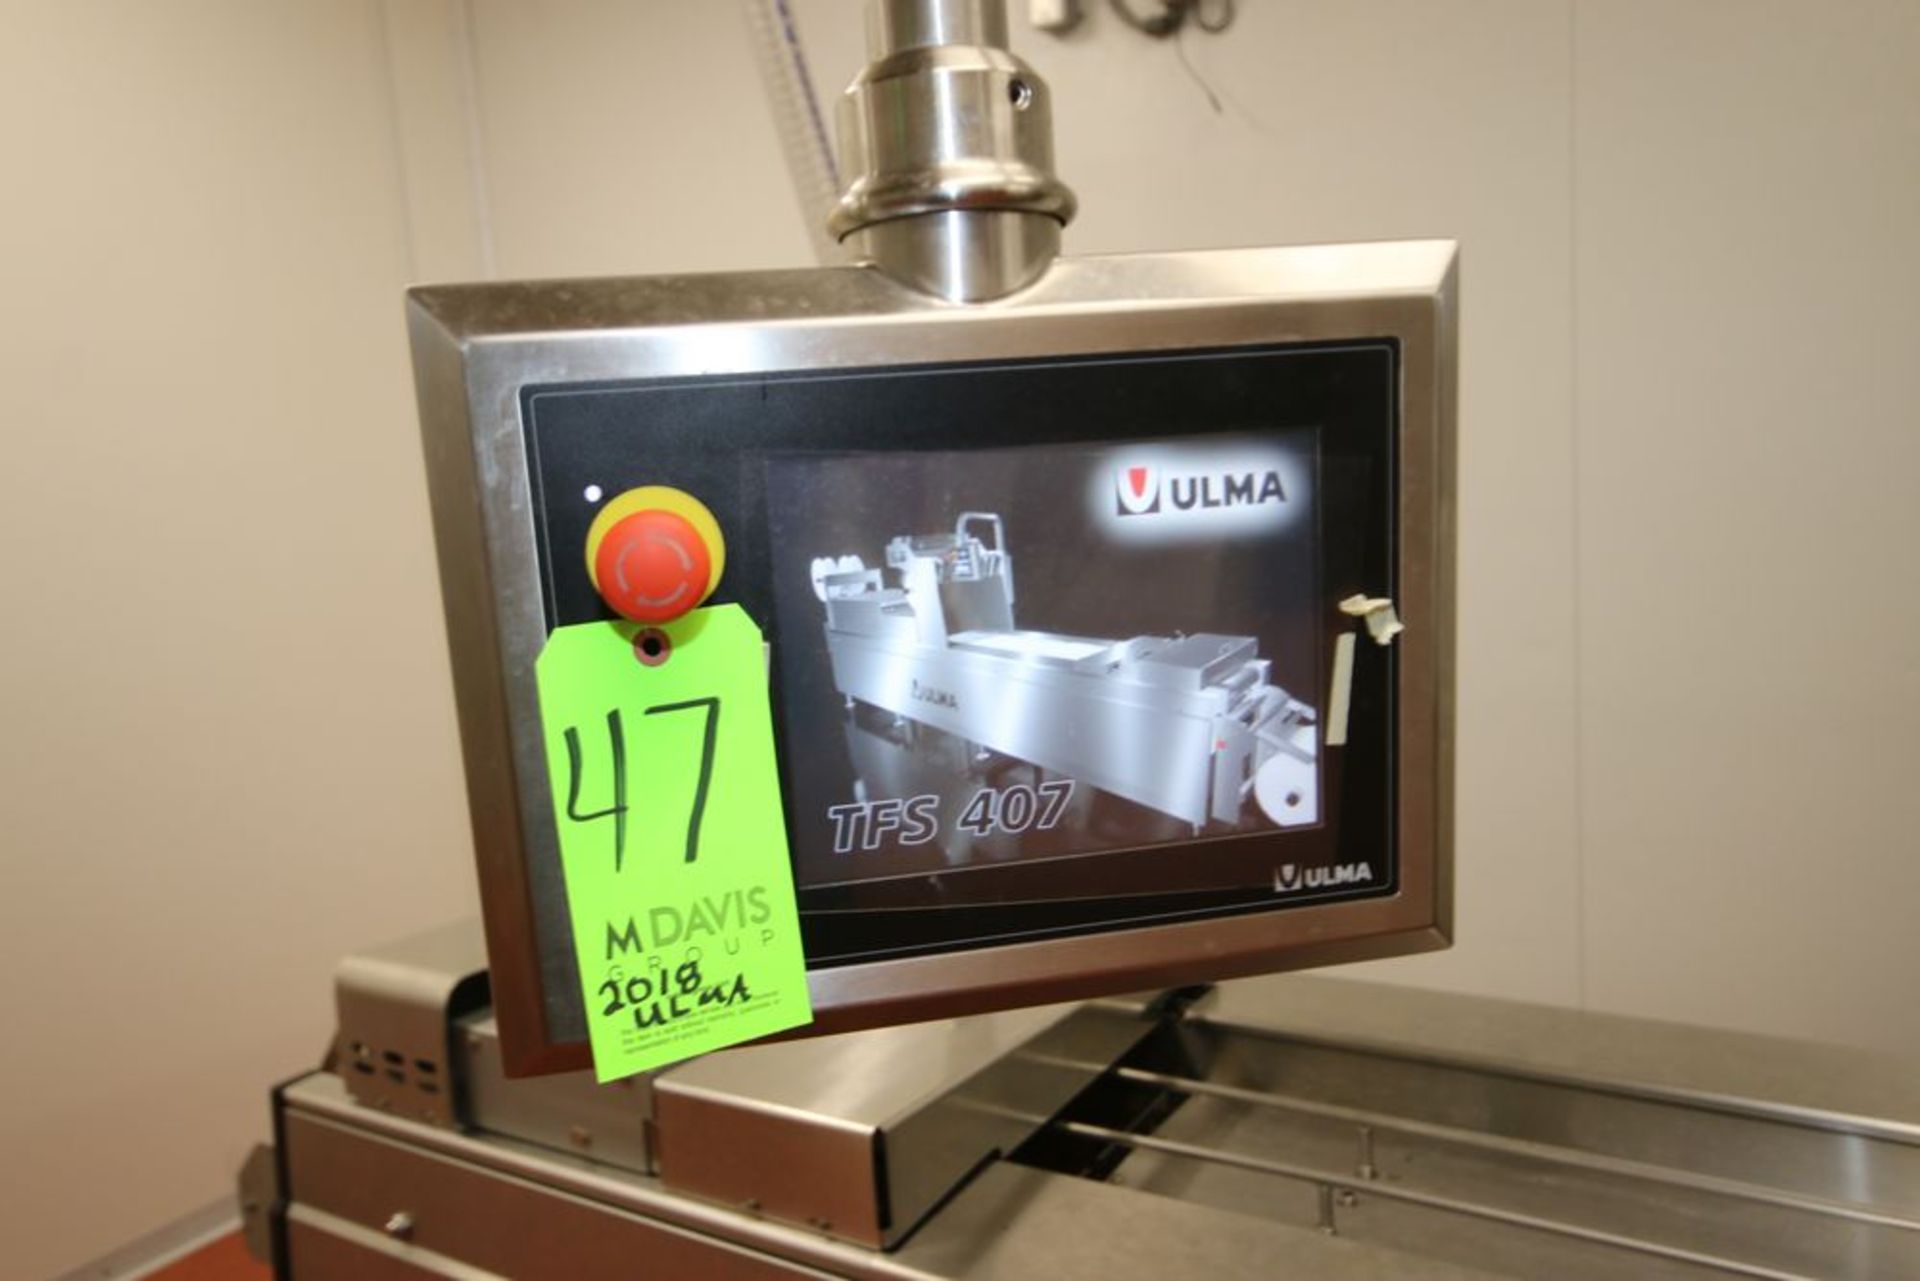 2018 Ulma Vacuum Packaging Machine, M/N TFS 407, S/N 3019981, 220 Volts, 3 Phase, with Touchscreen - Image 8 of 21